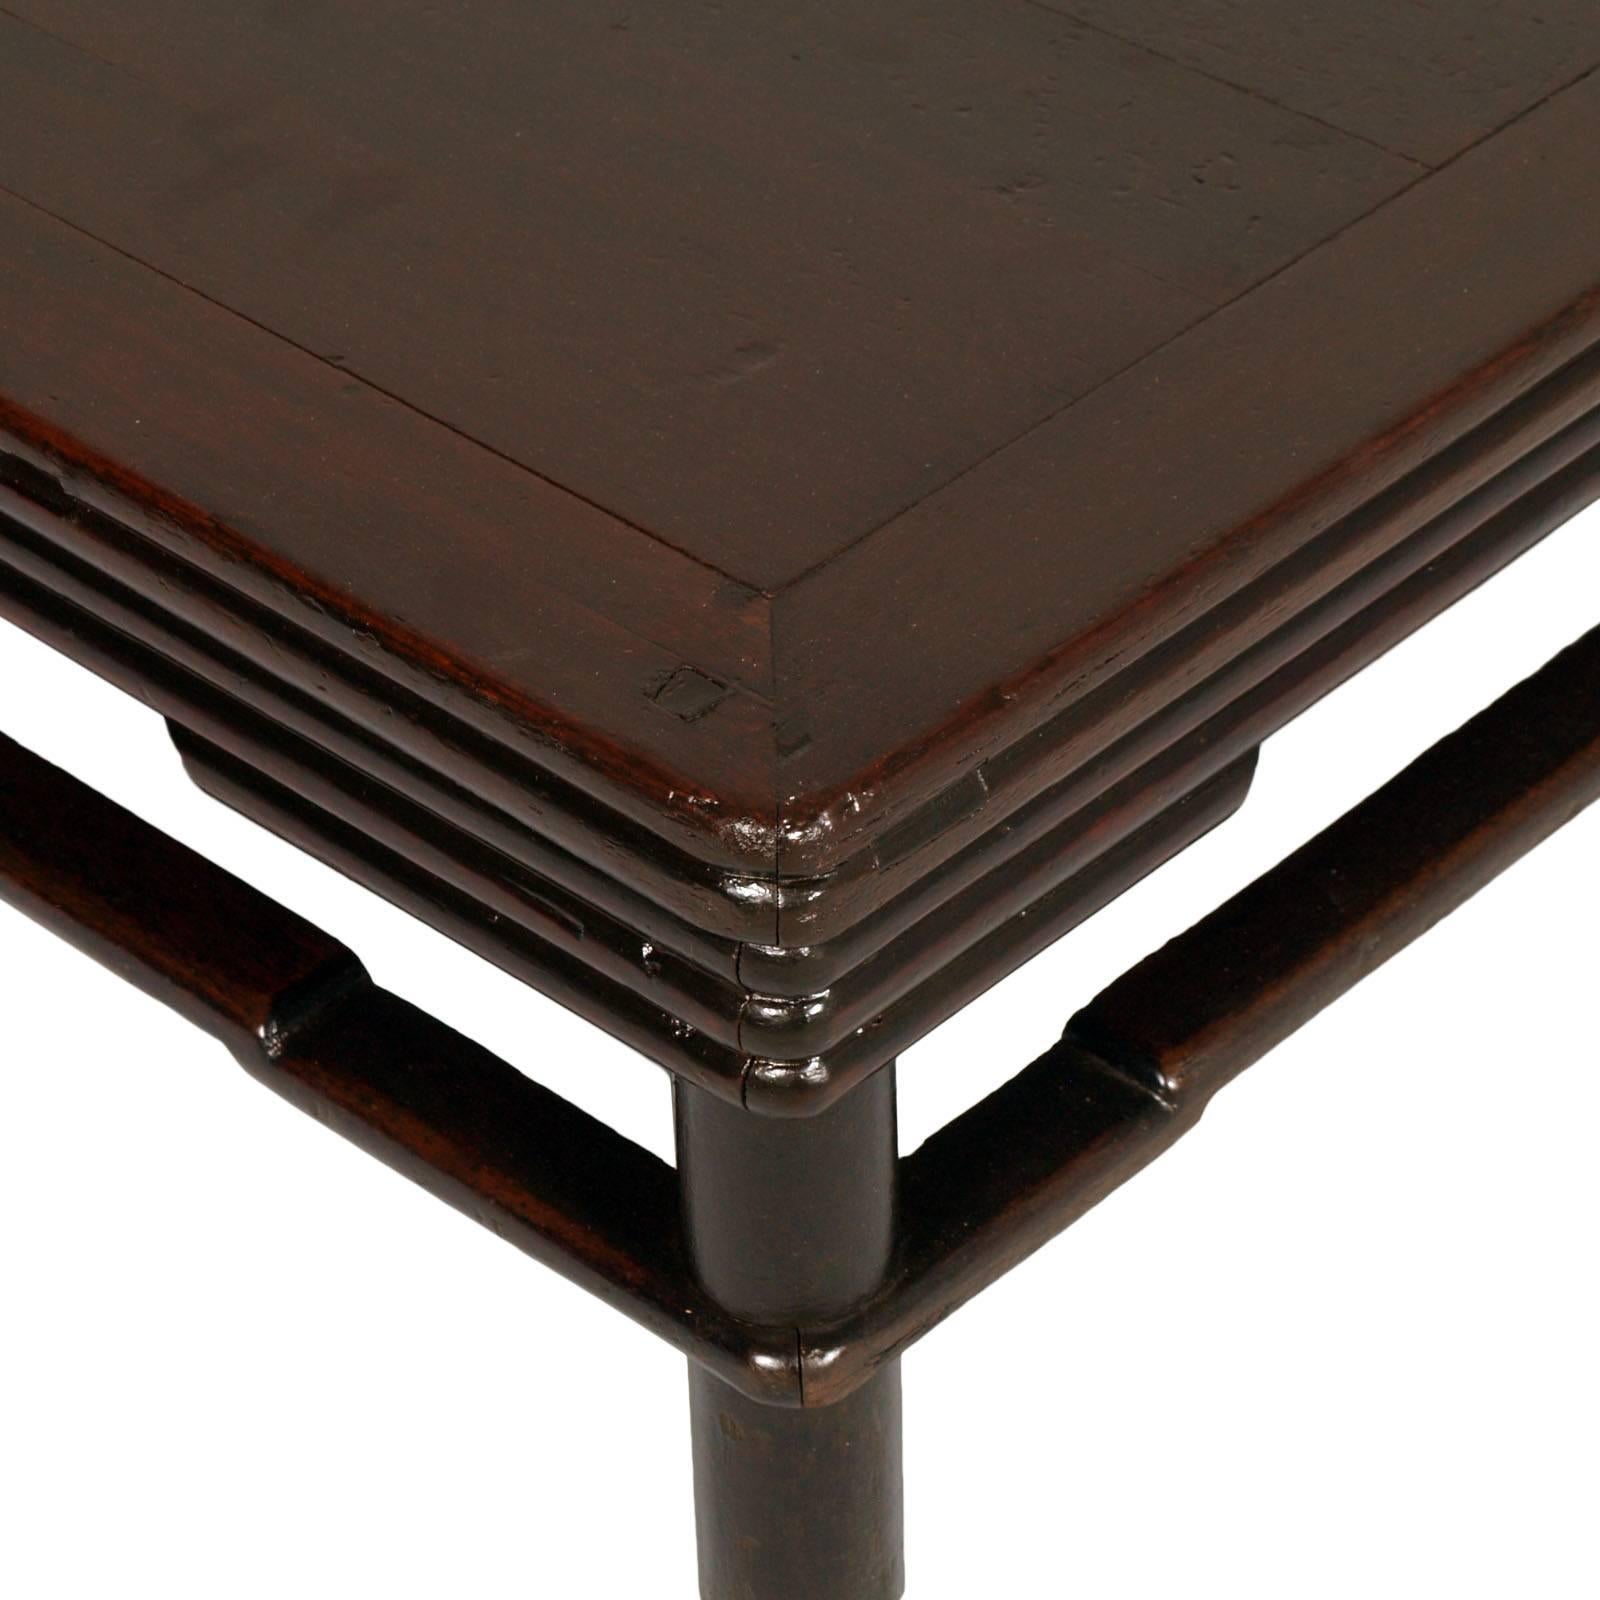 Coffee table, Ming Style, by Guglielmo Urlich, in solid walnut restored and wax finished, circa 1930s.

Measures cm: H29 W85 D53

About Guglielmo Urlich
Guglielmo Ulrich (Millan, 1904 – 1977) was an Italian architect, - designer – a descendant